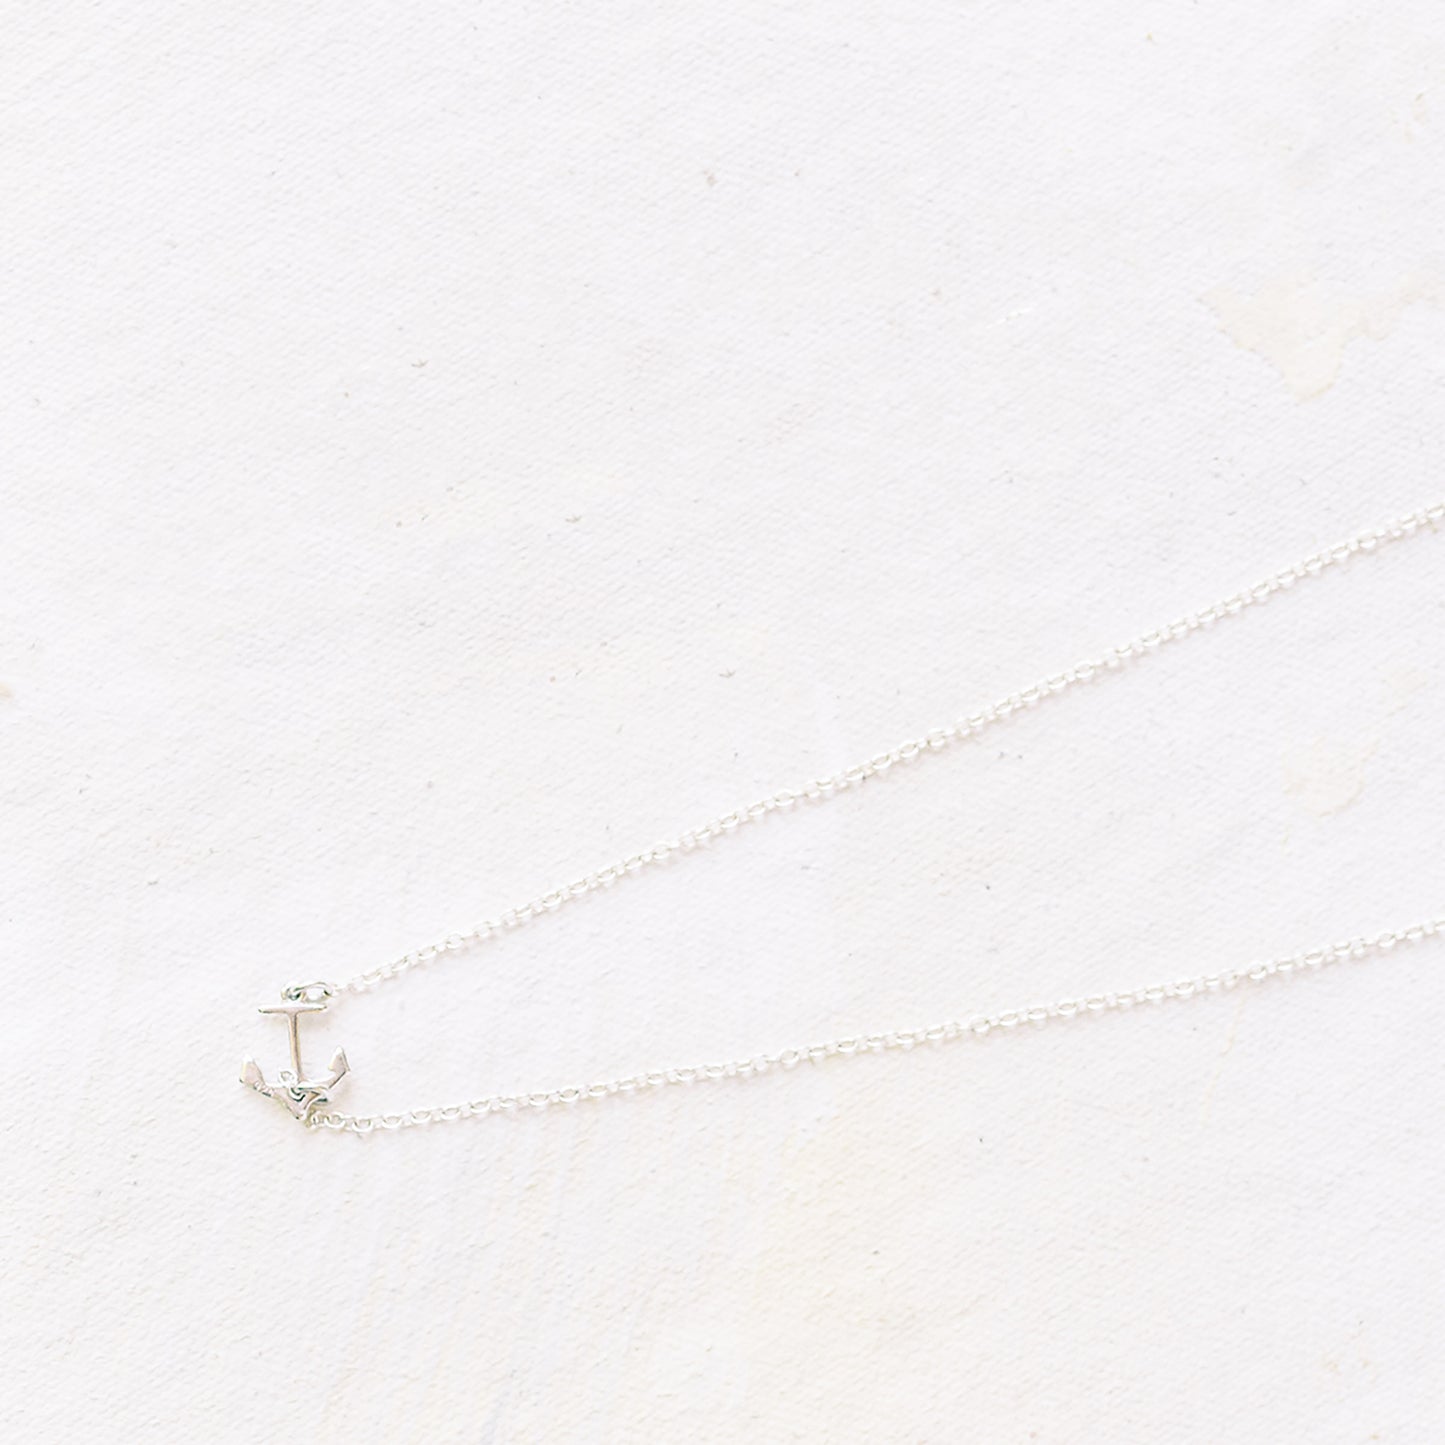 Dainty Silver Anchor Jewelry 